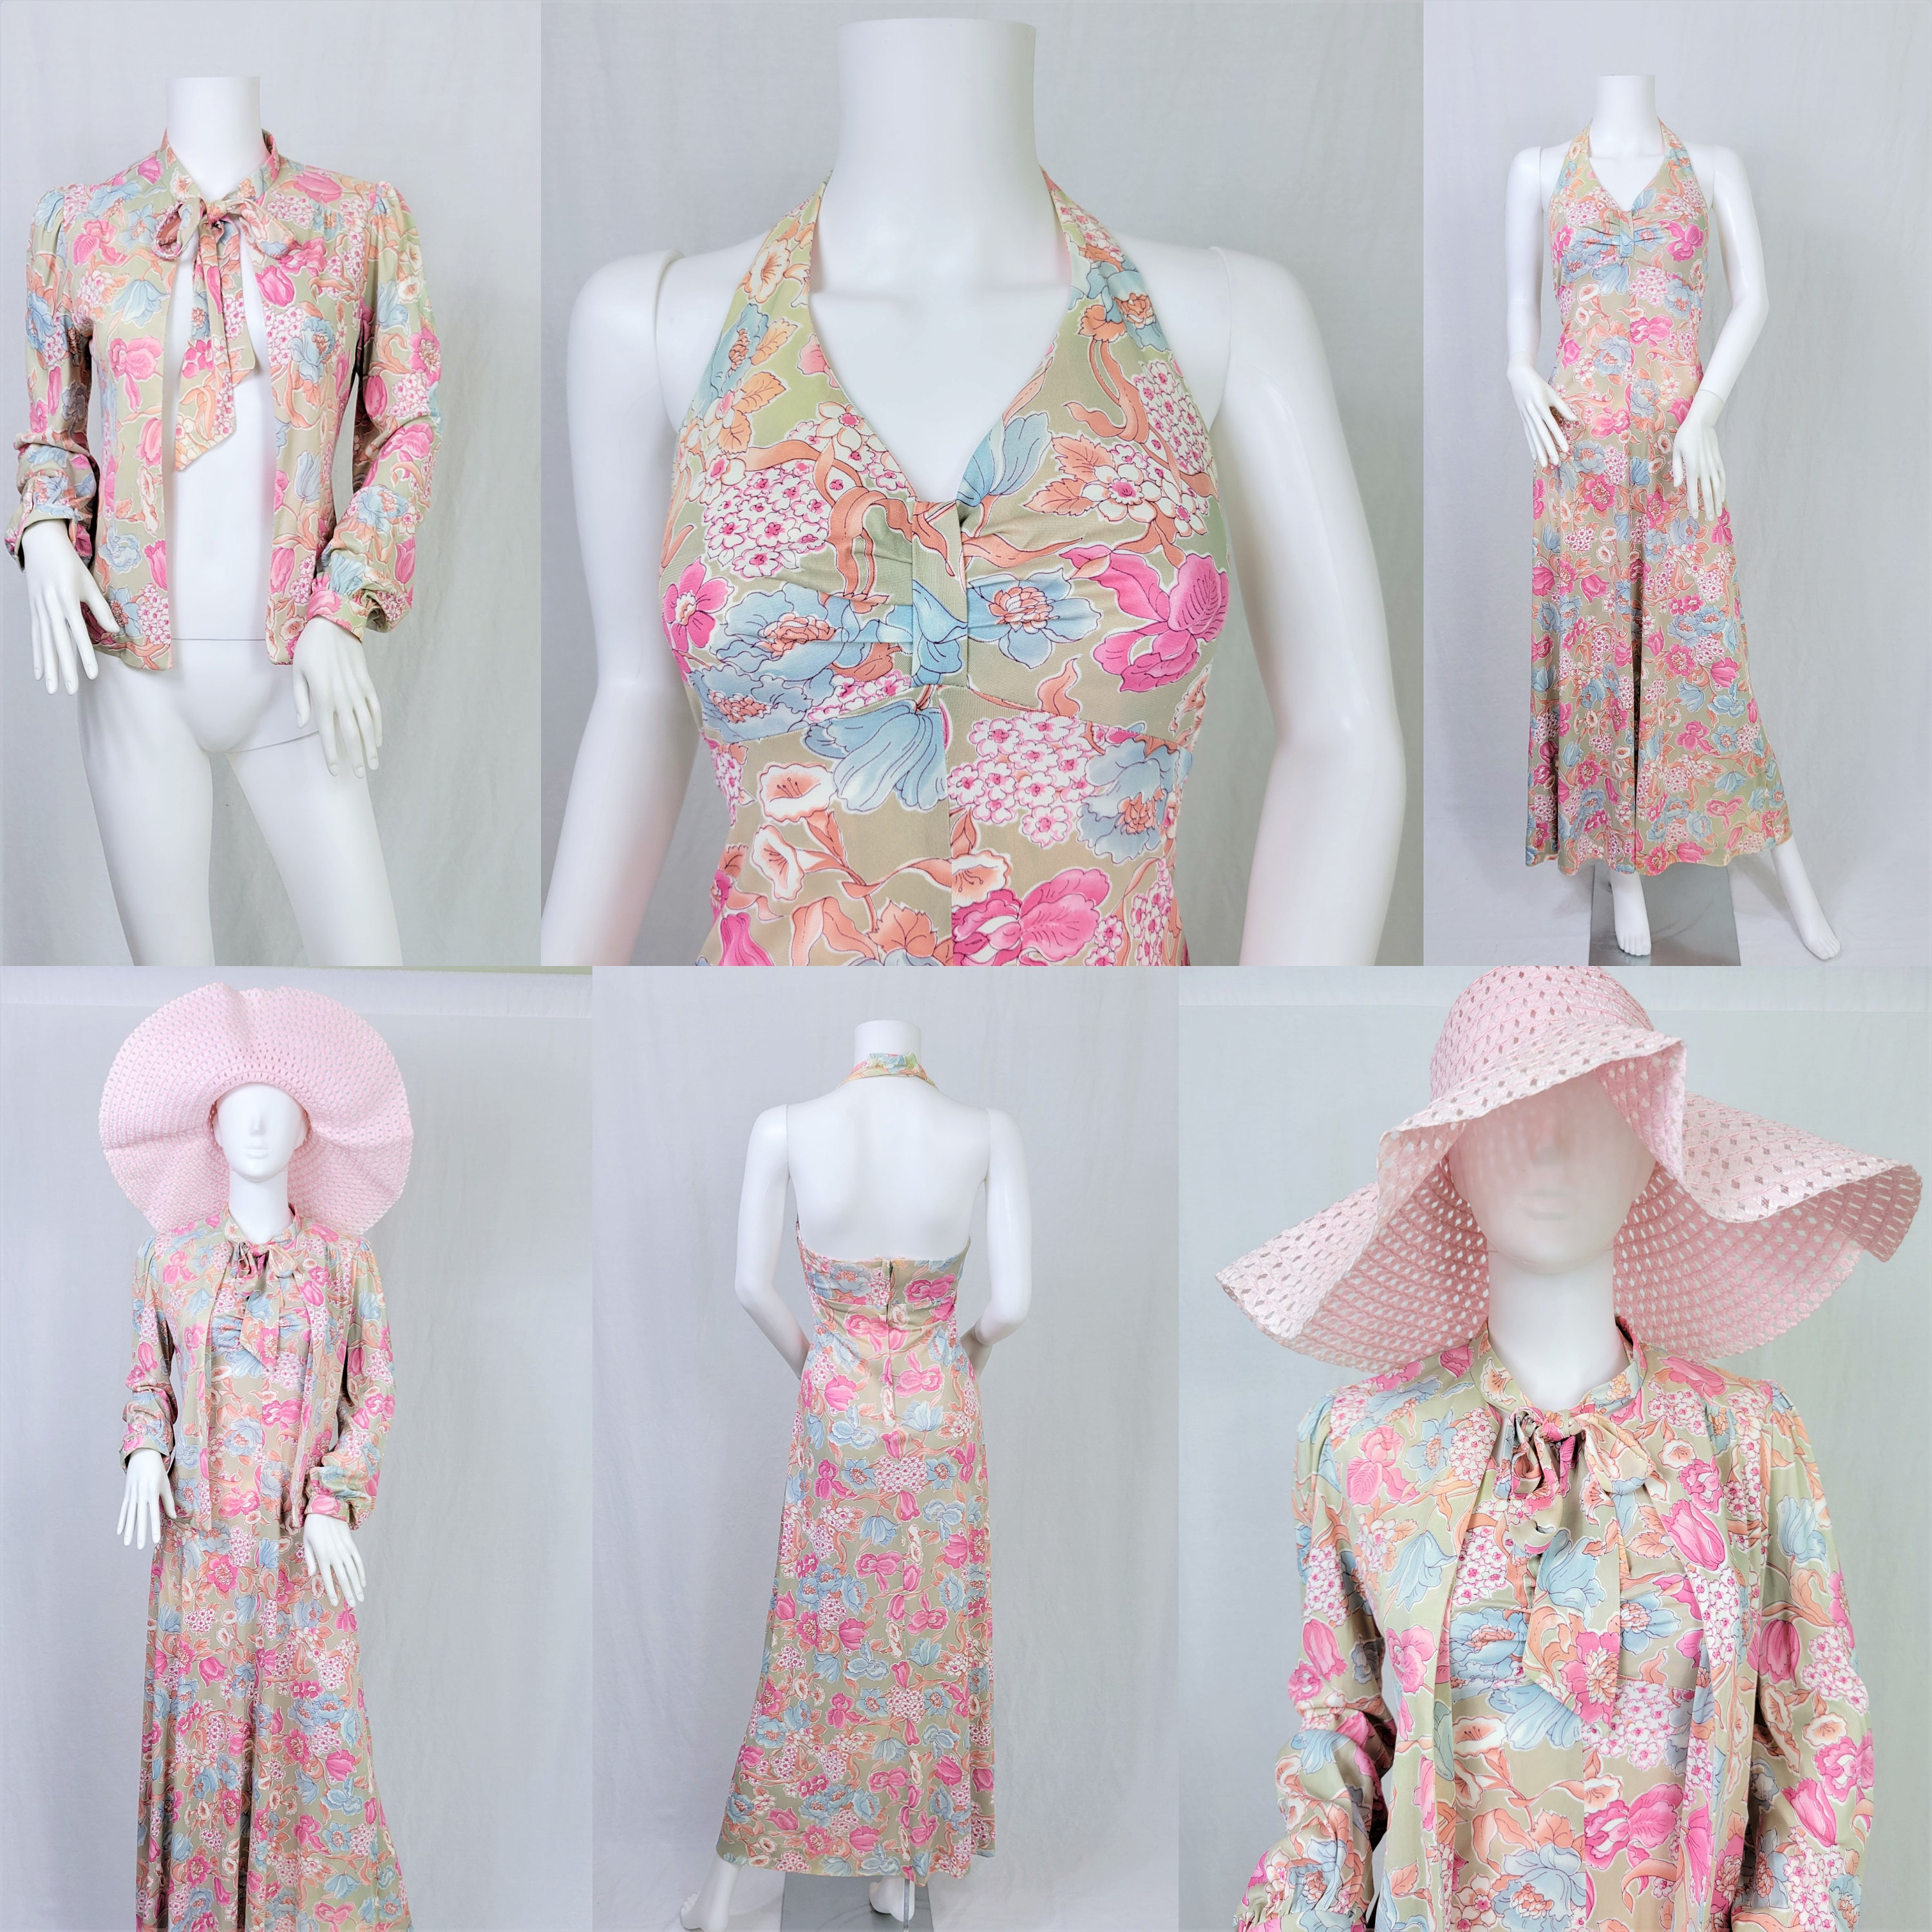 Hat Sold Separately 1970's Pastel Floral 2 Pc Halter Dress and Jacket I 70's does 30's I Sz Sm